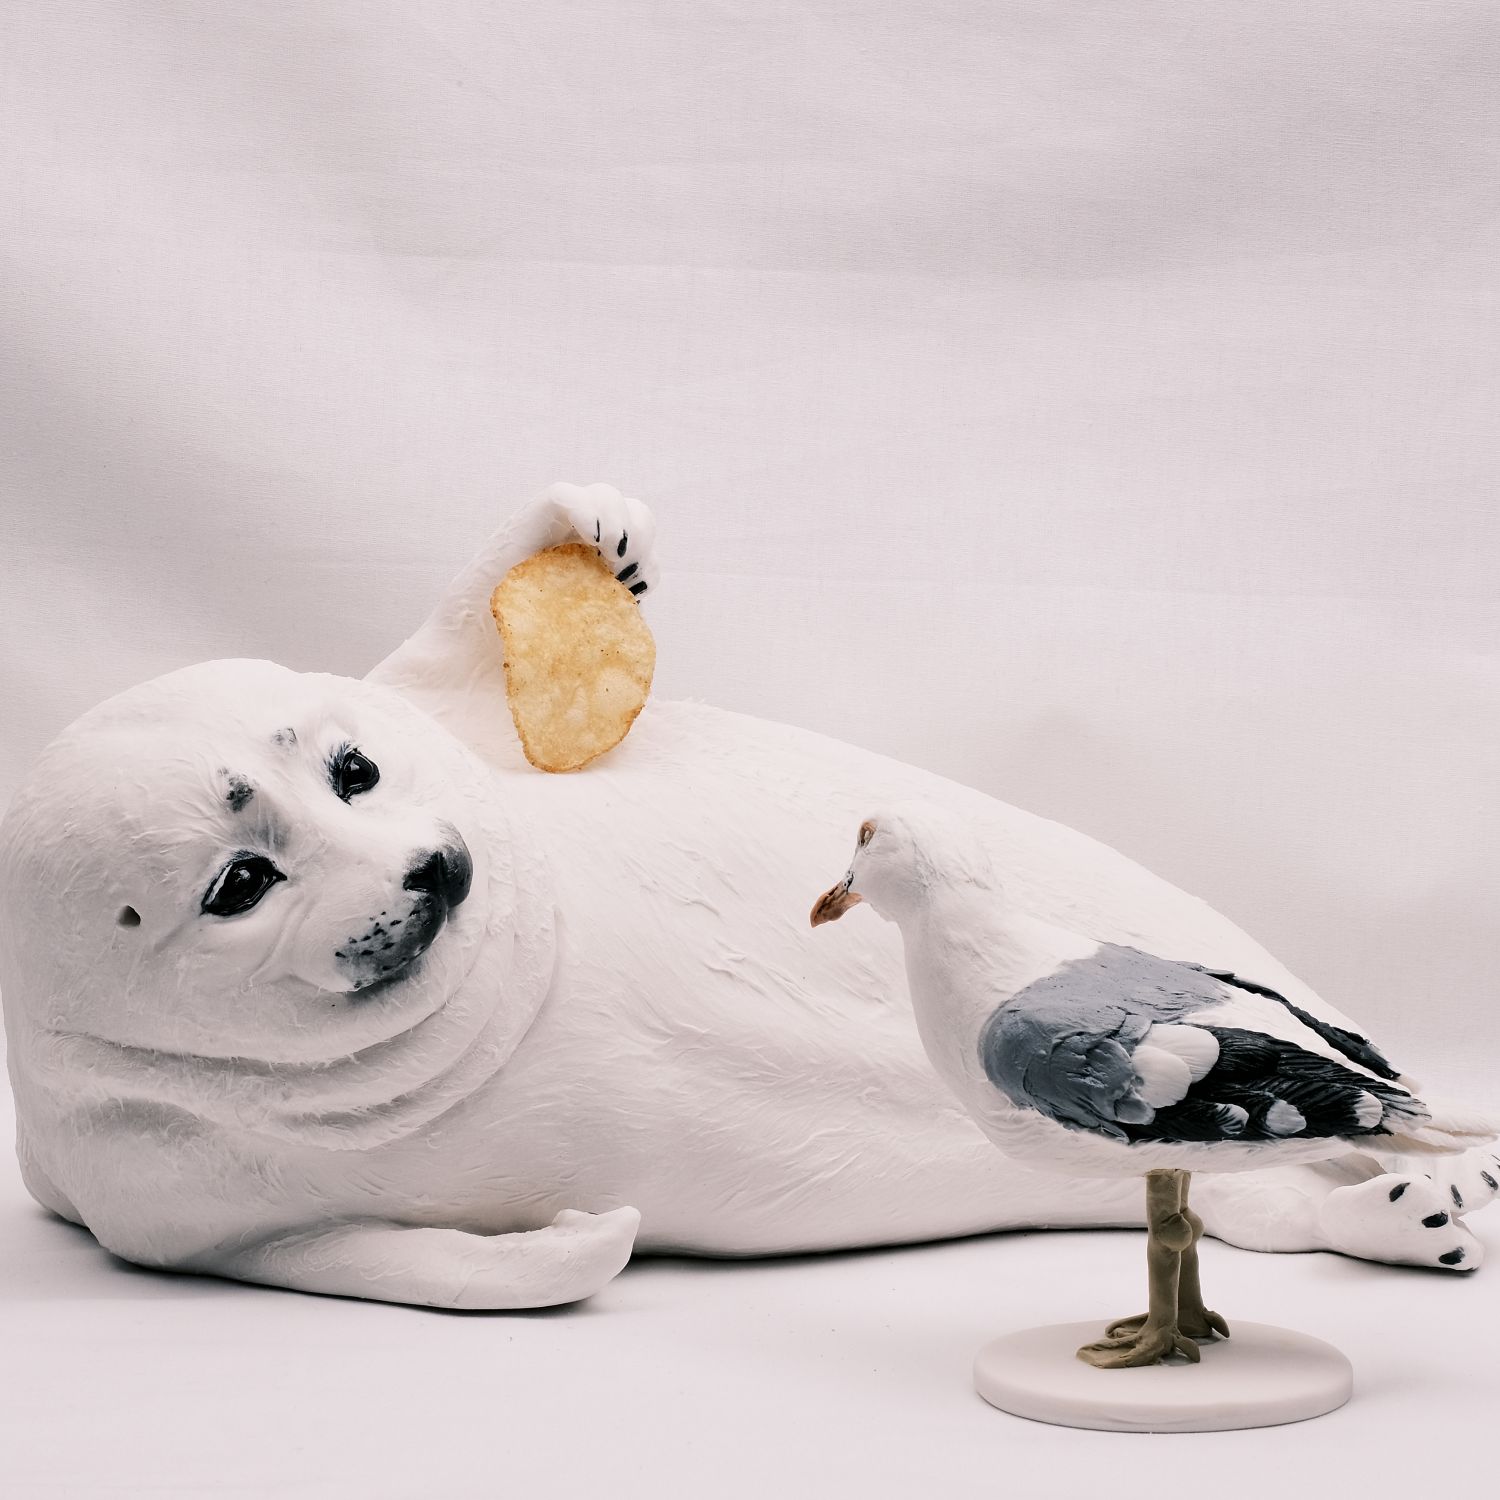 Peidi Wang: Seal with a seagull #1 Product Image 1 of 3